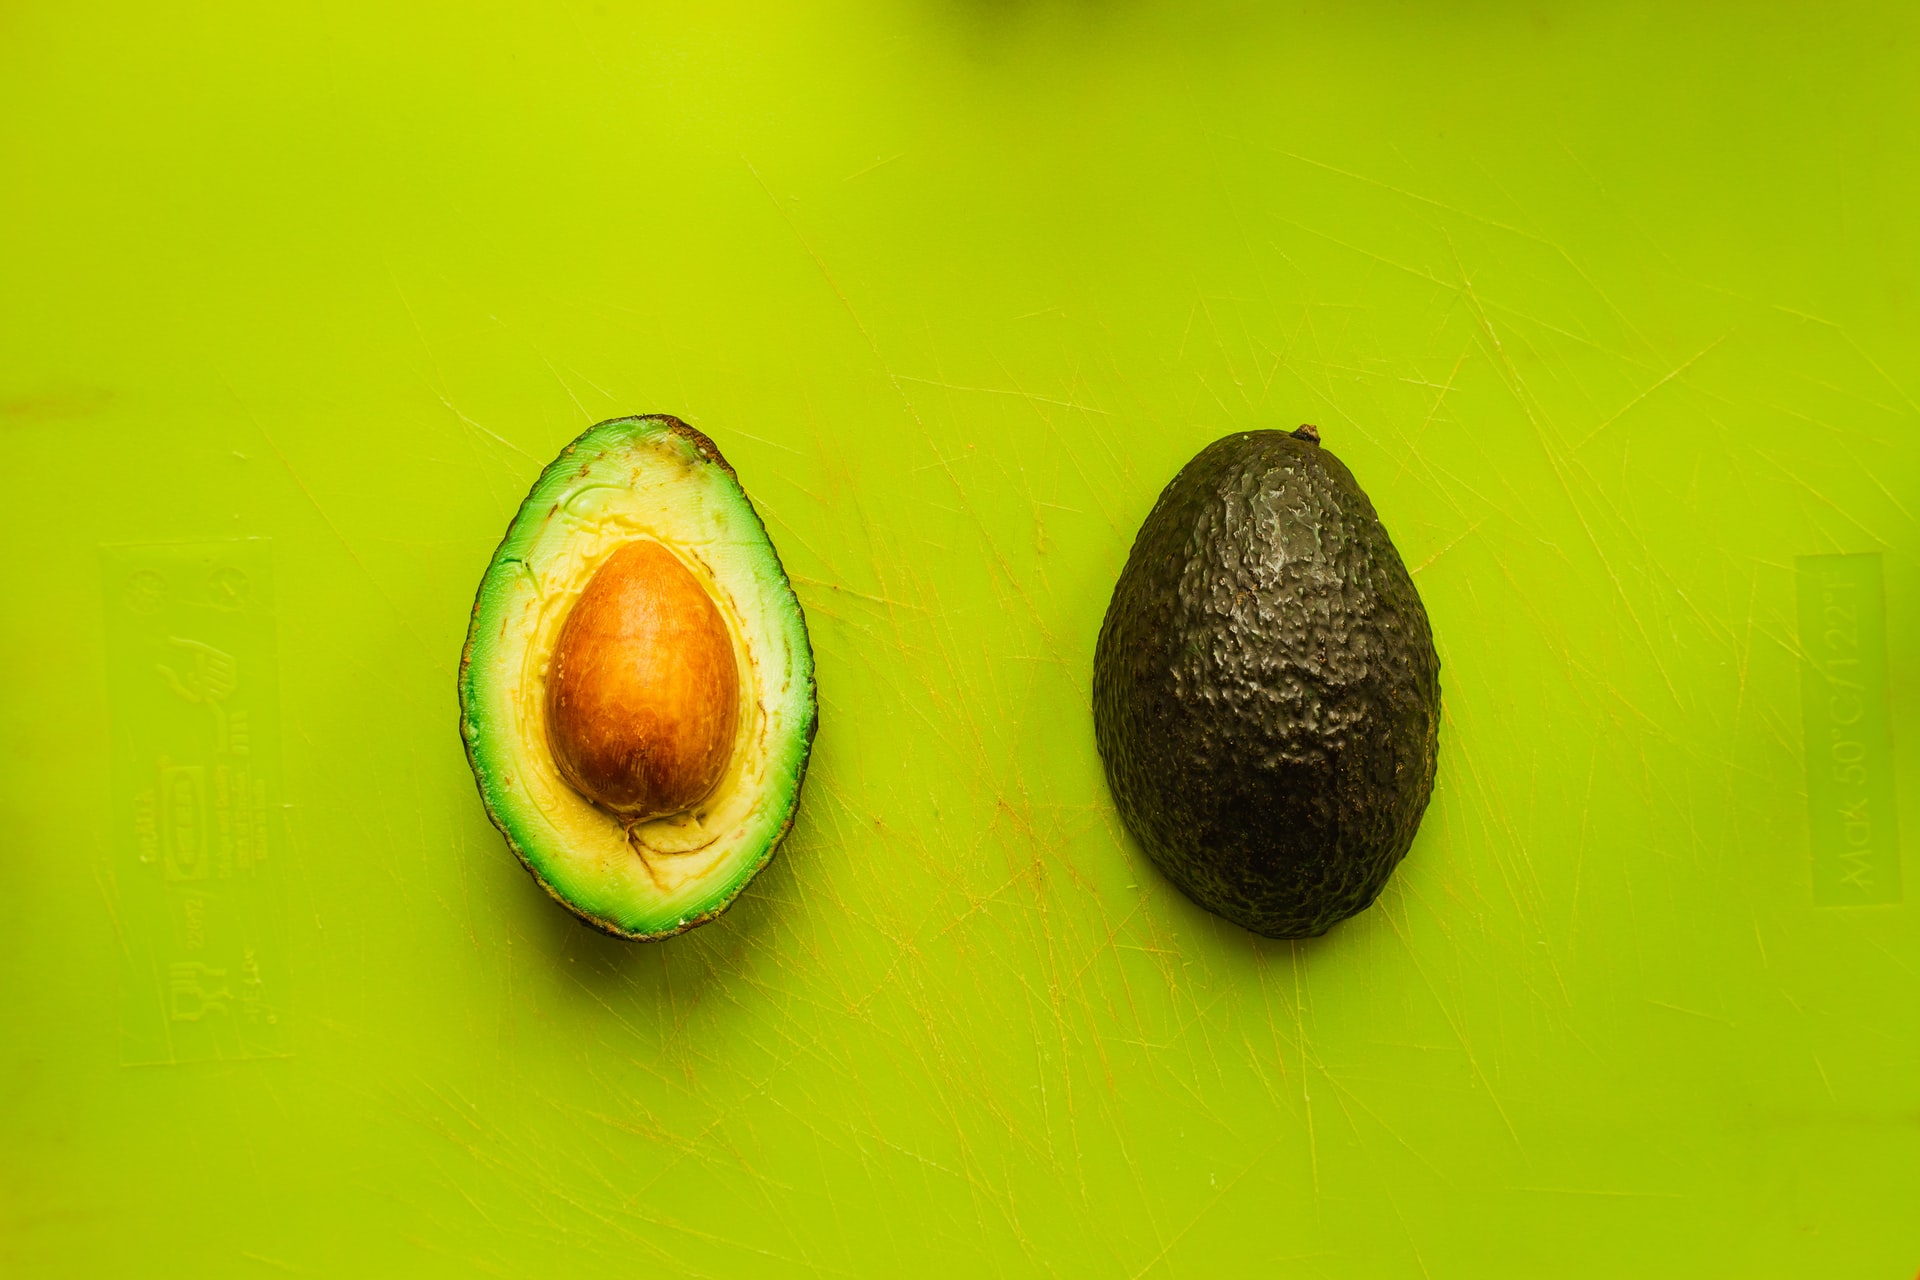 How to Plant Your First Avocado During Quarantine 14